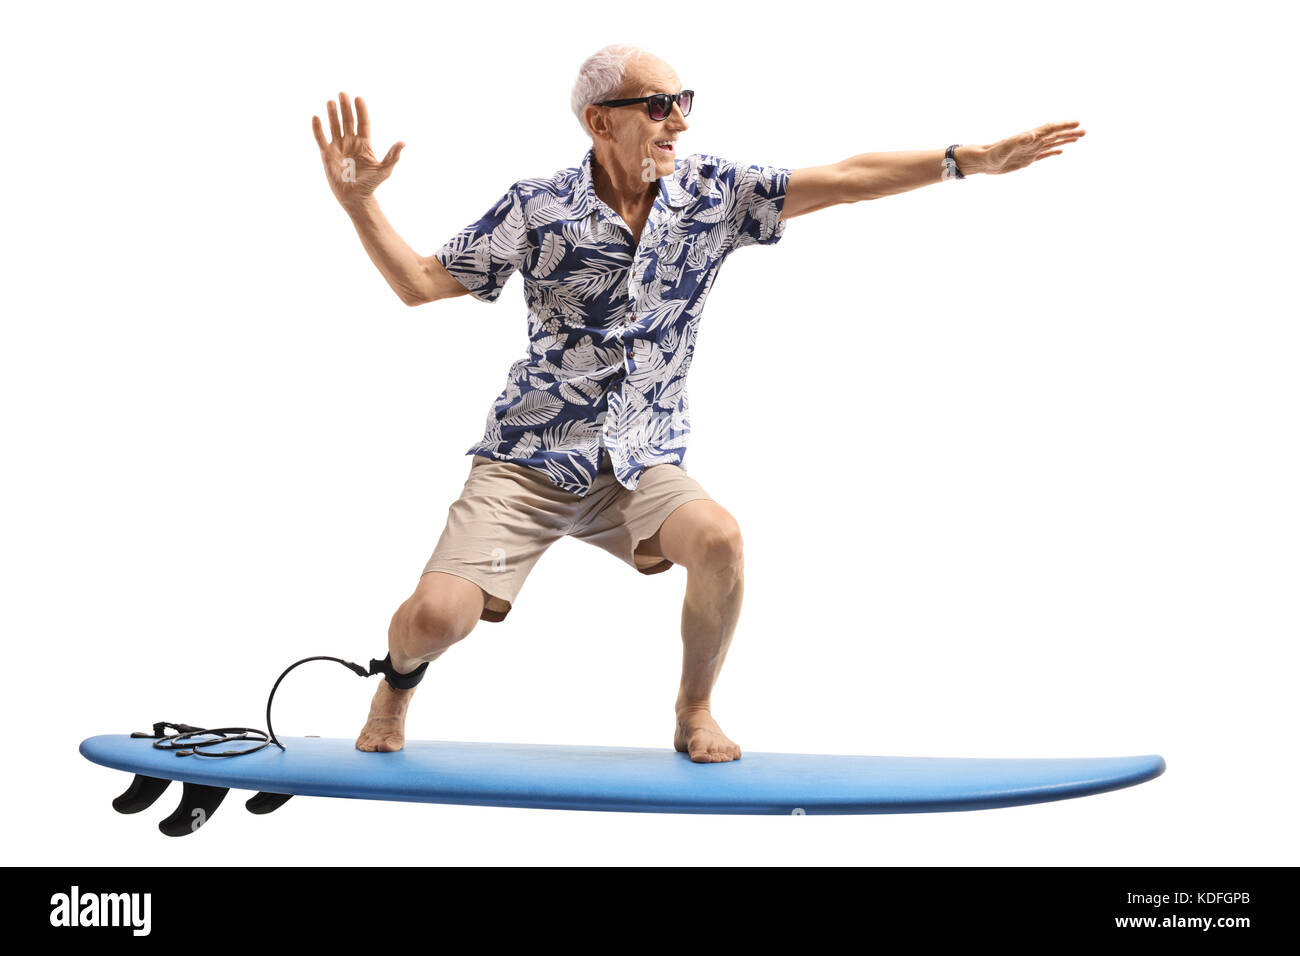 Senior surfing on a surfboard isolated on white background Stock Photo